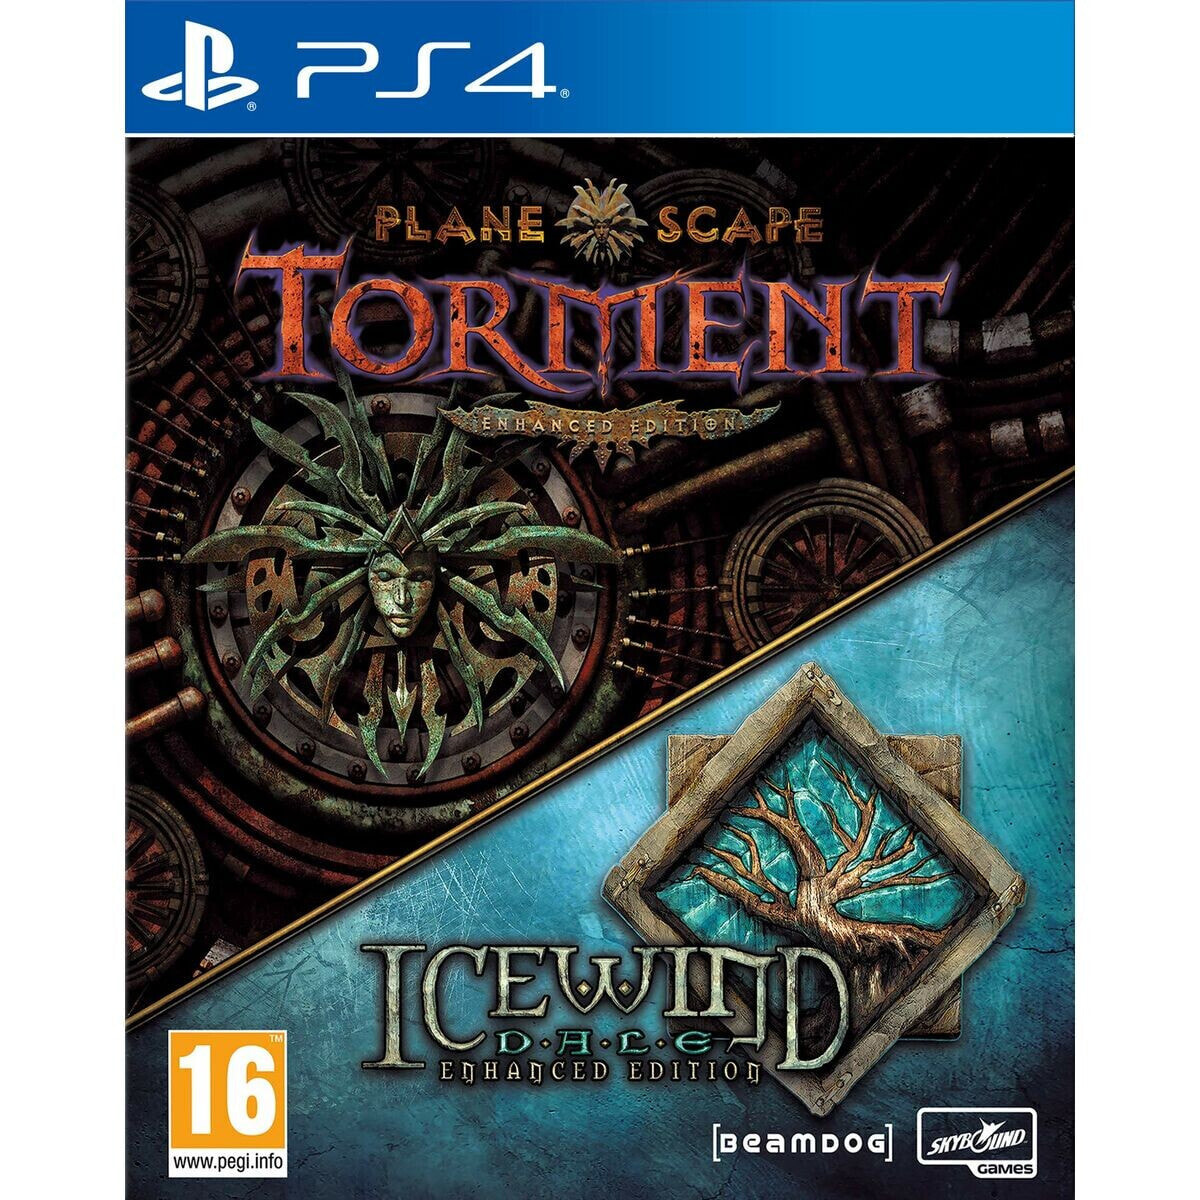 PlayStation 4 Video Game Meridiem Games Planescape: Torment & Icewind Dale E.E